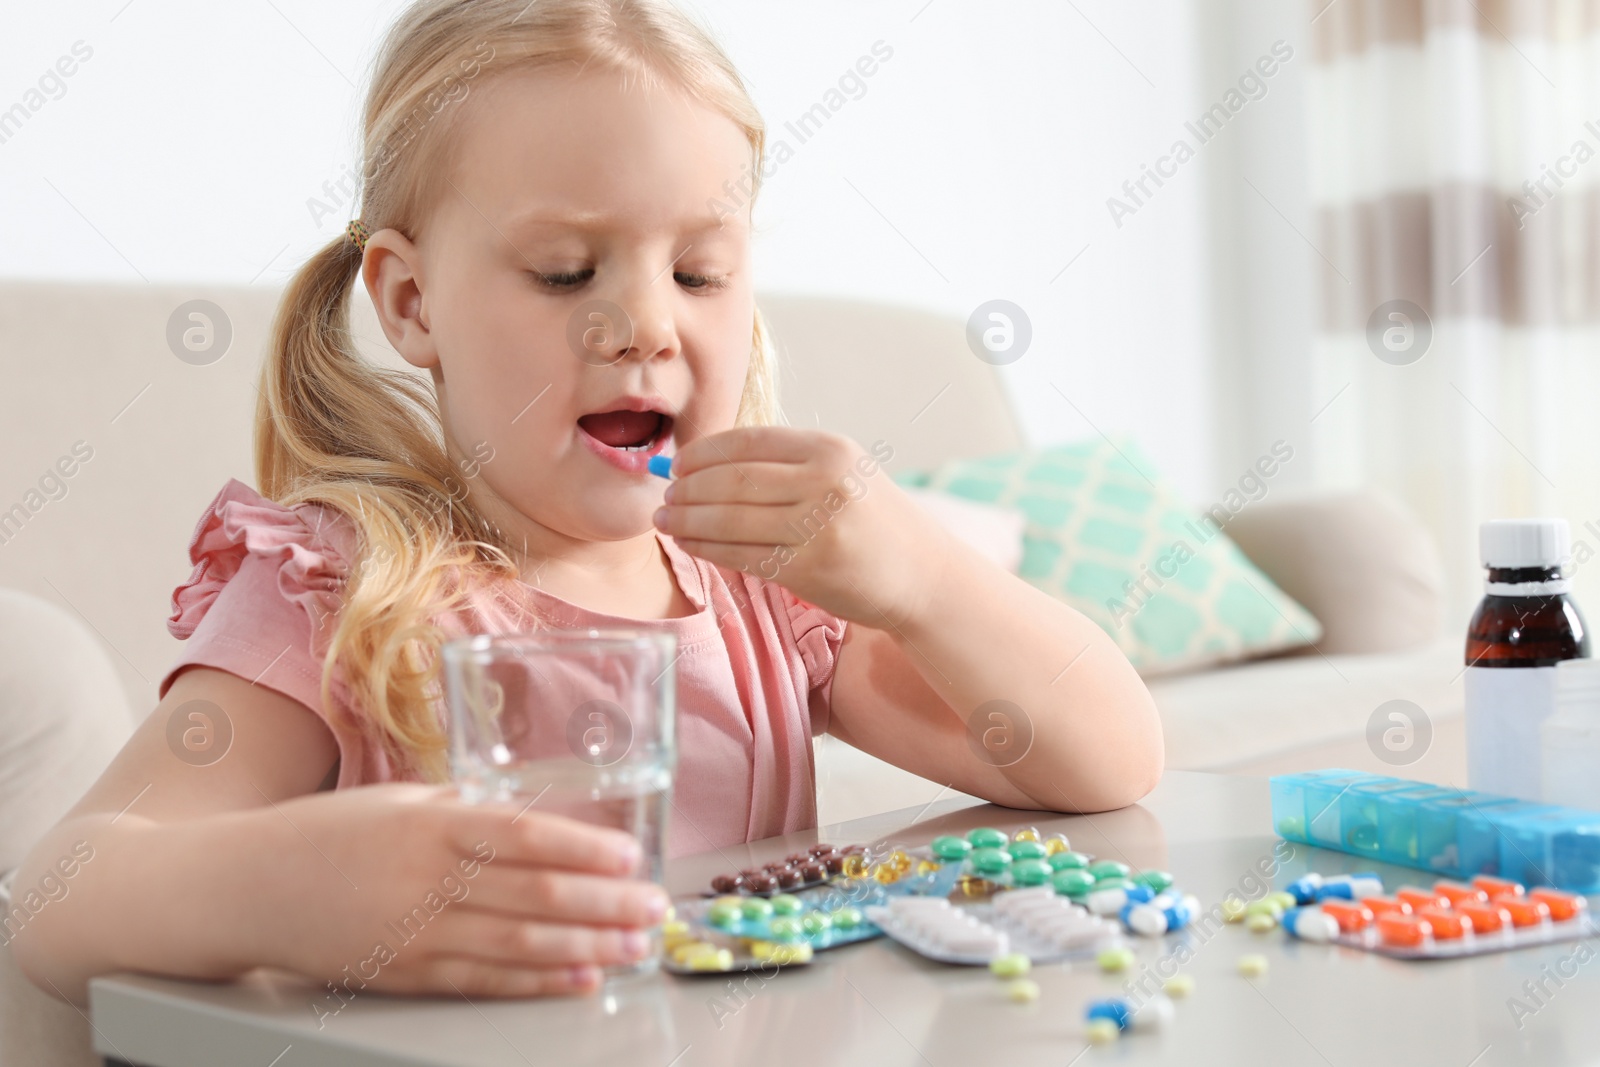 Photo of Little child taking pill at table indoors. Danger of medicament intoxication